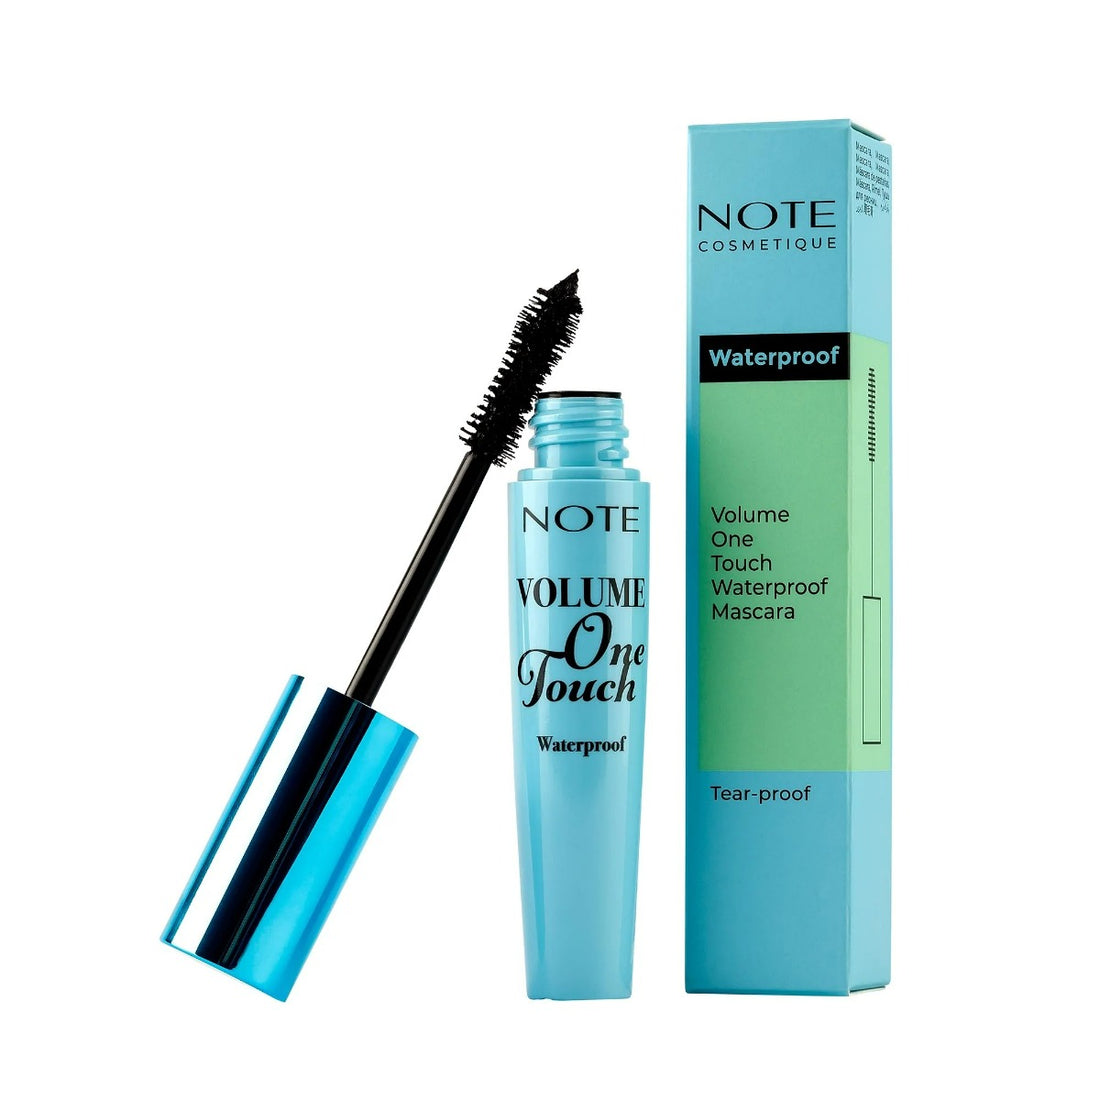 Note Volume One Touch Waterproof Mascara (10ml)